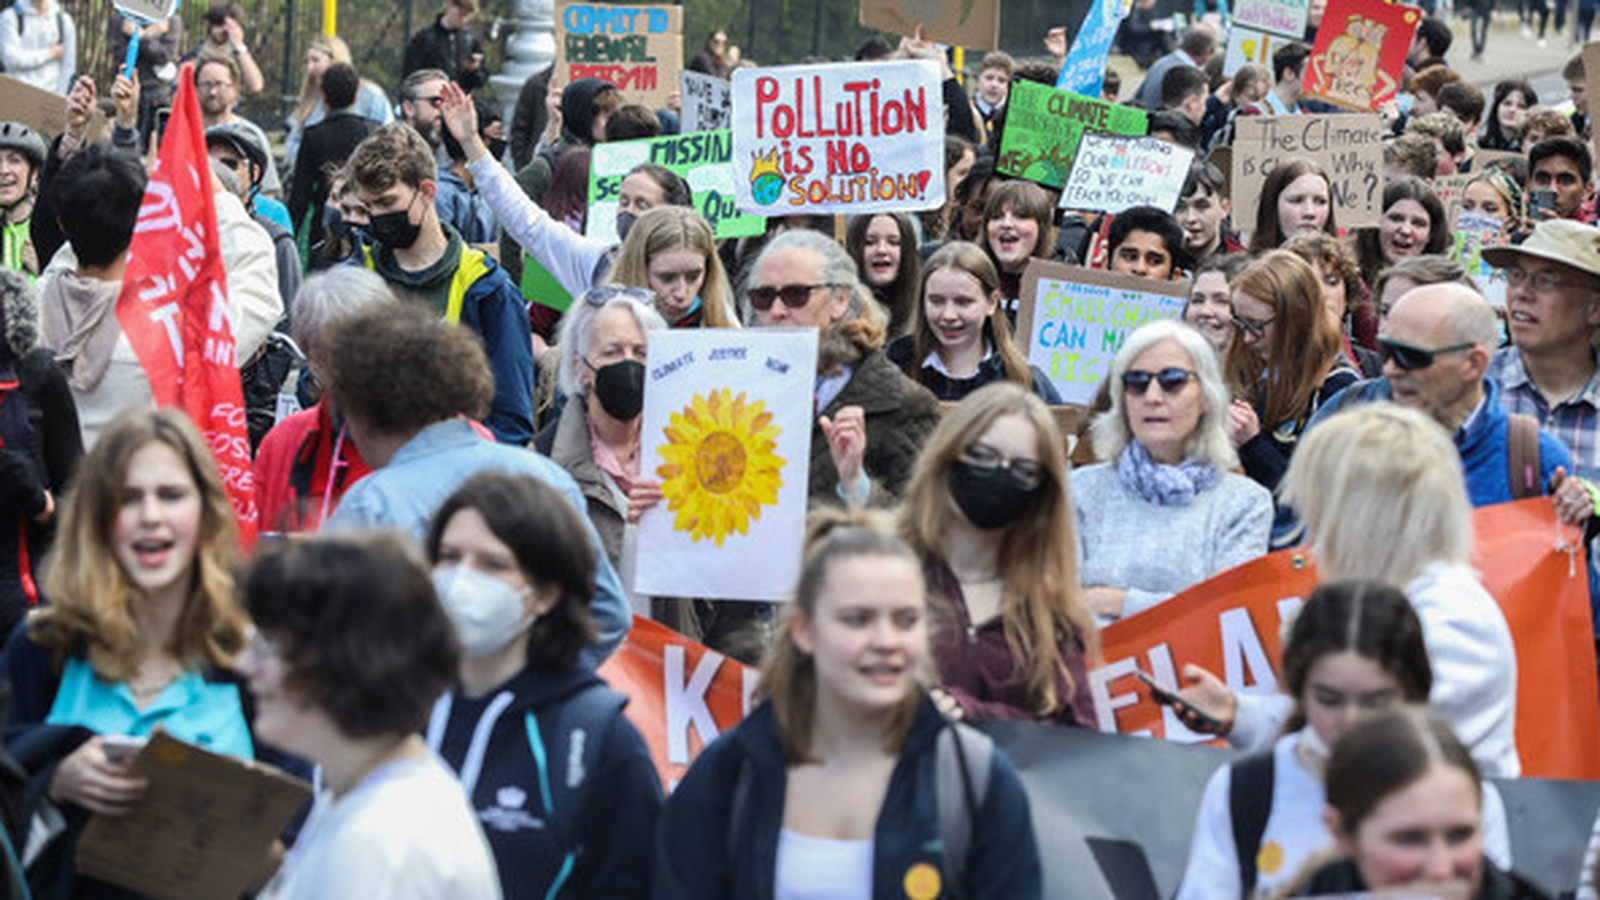 Young people demand action to tackle climate change - Dublin - RTE.ie